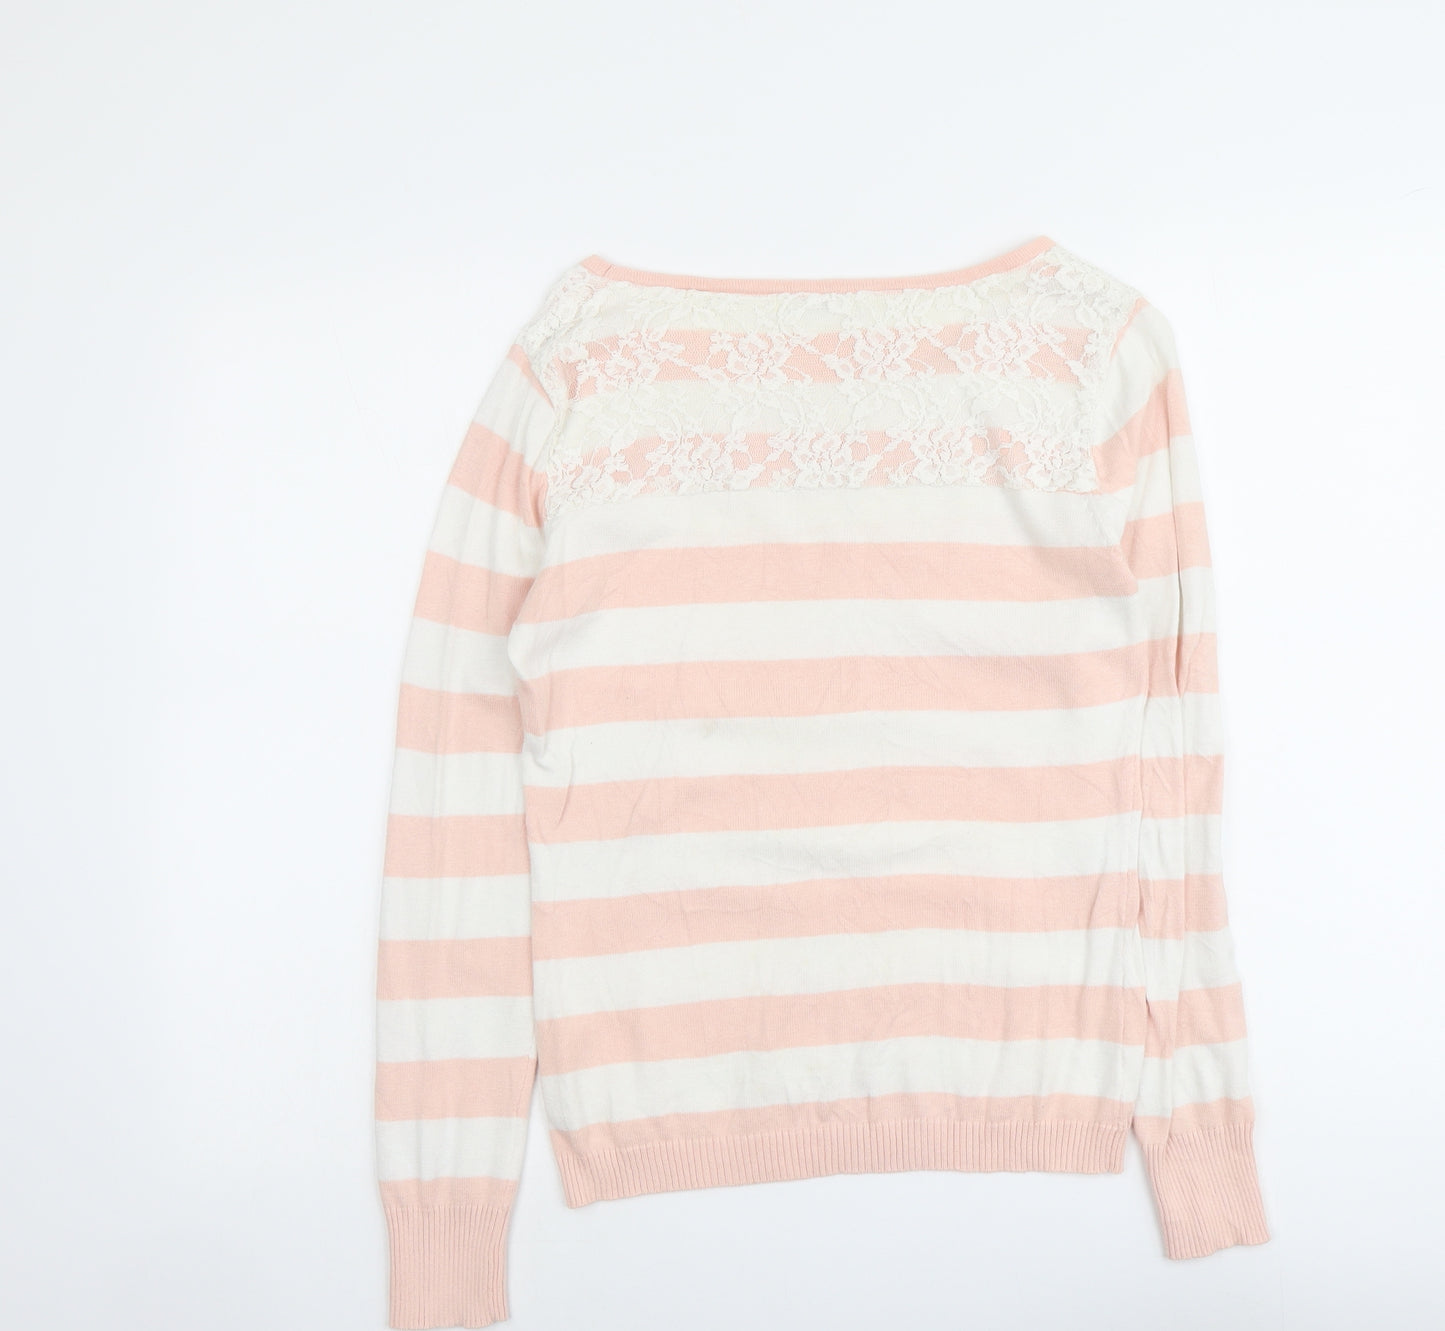 Nicole Womens Pink Round Neck Striped Cotton Pullover Jumper Size M - Lace Detail